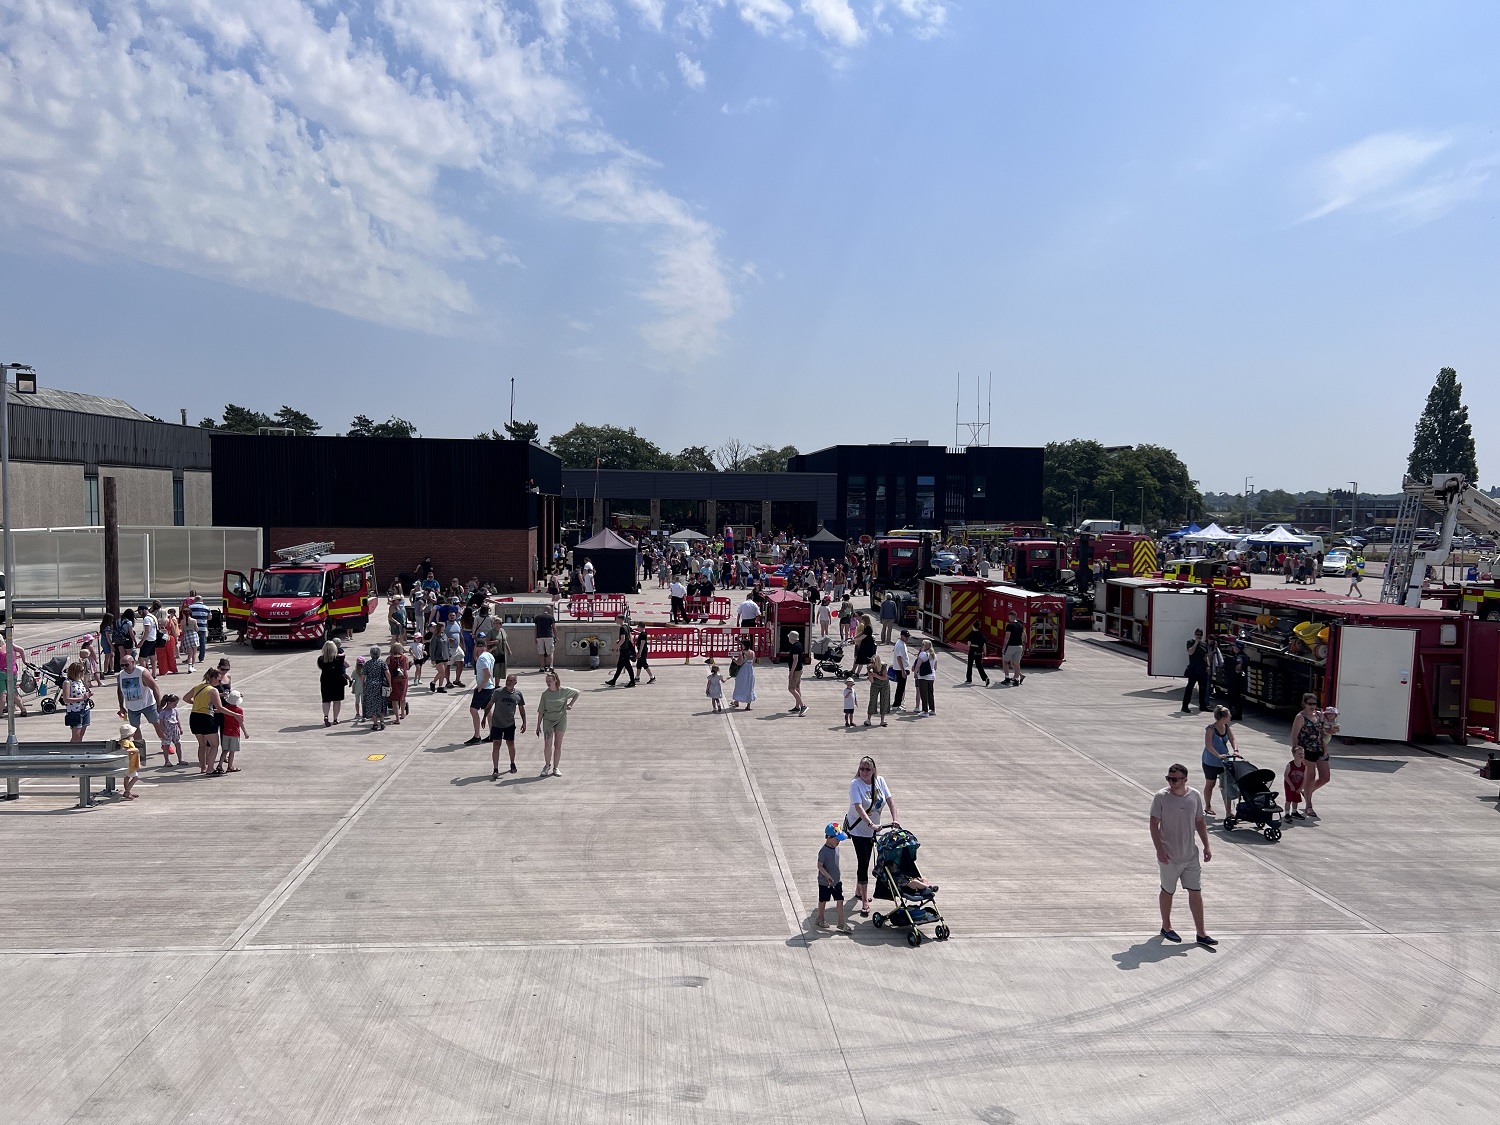 Wyre Forest Fire Station 2023 open day